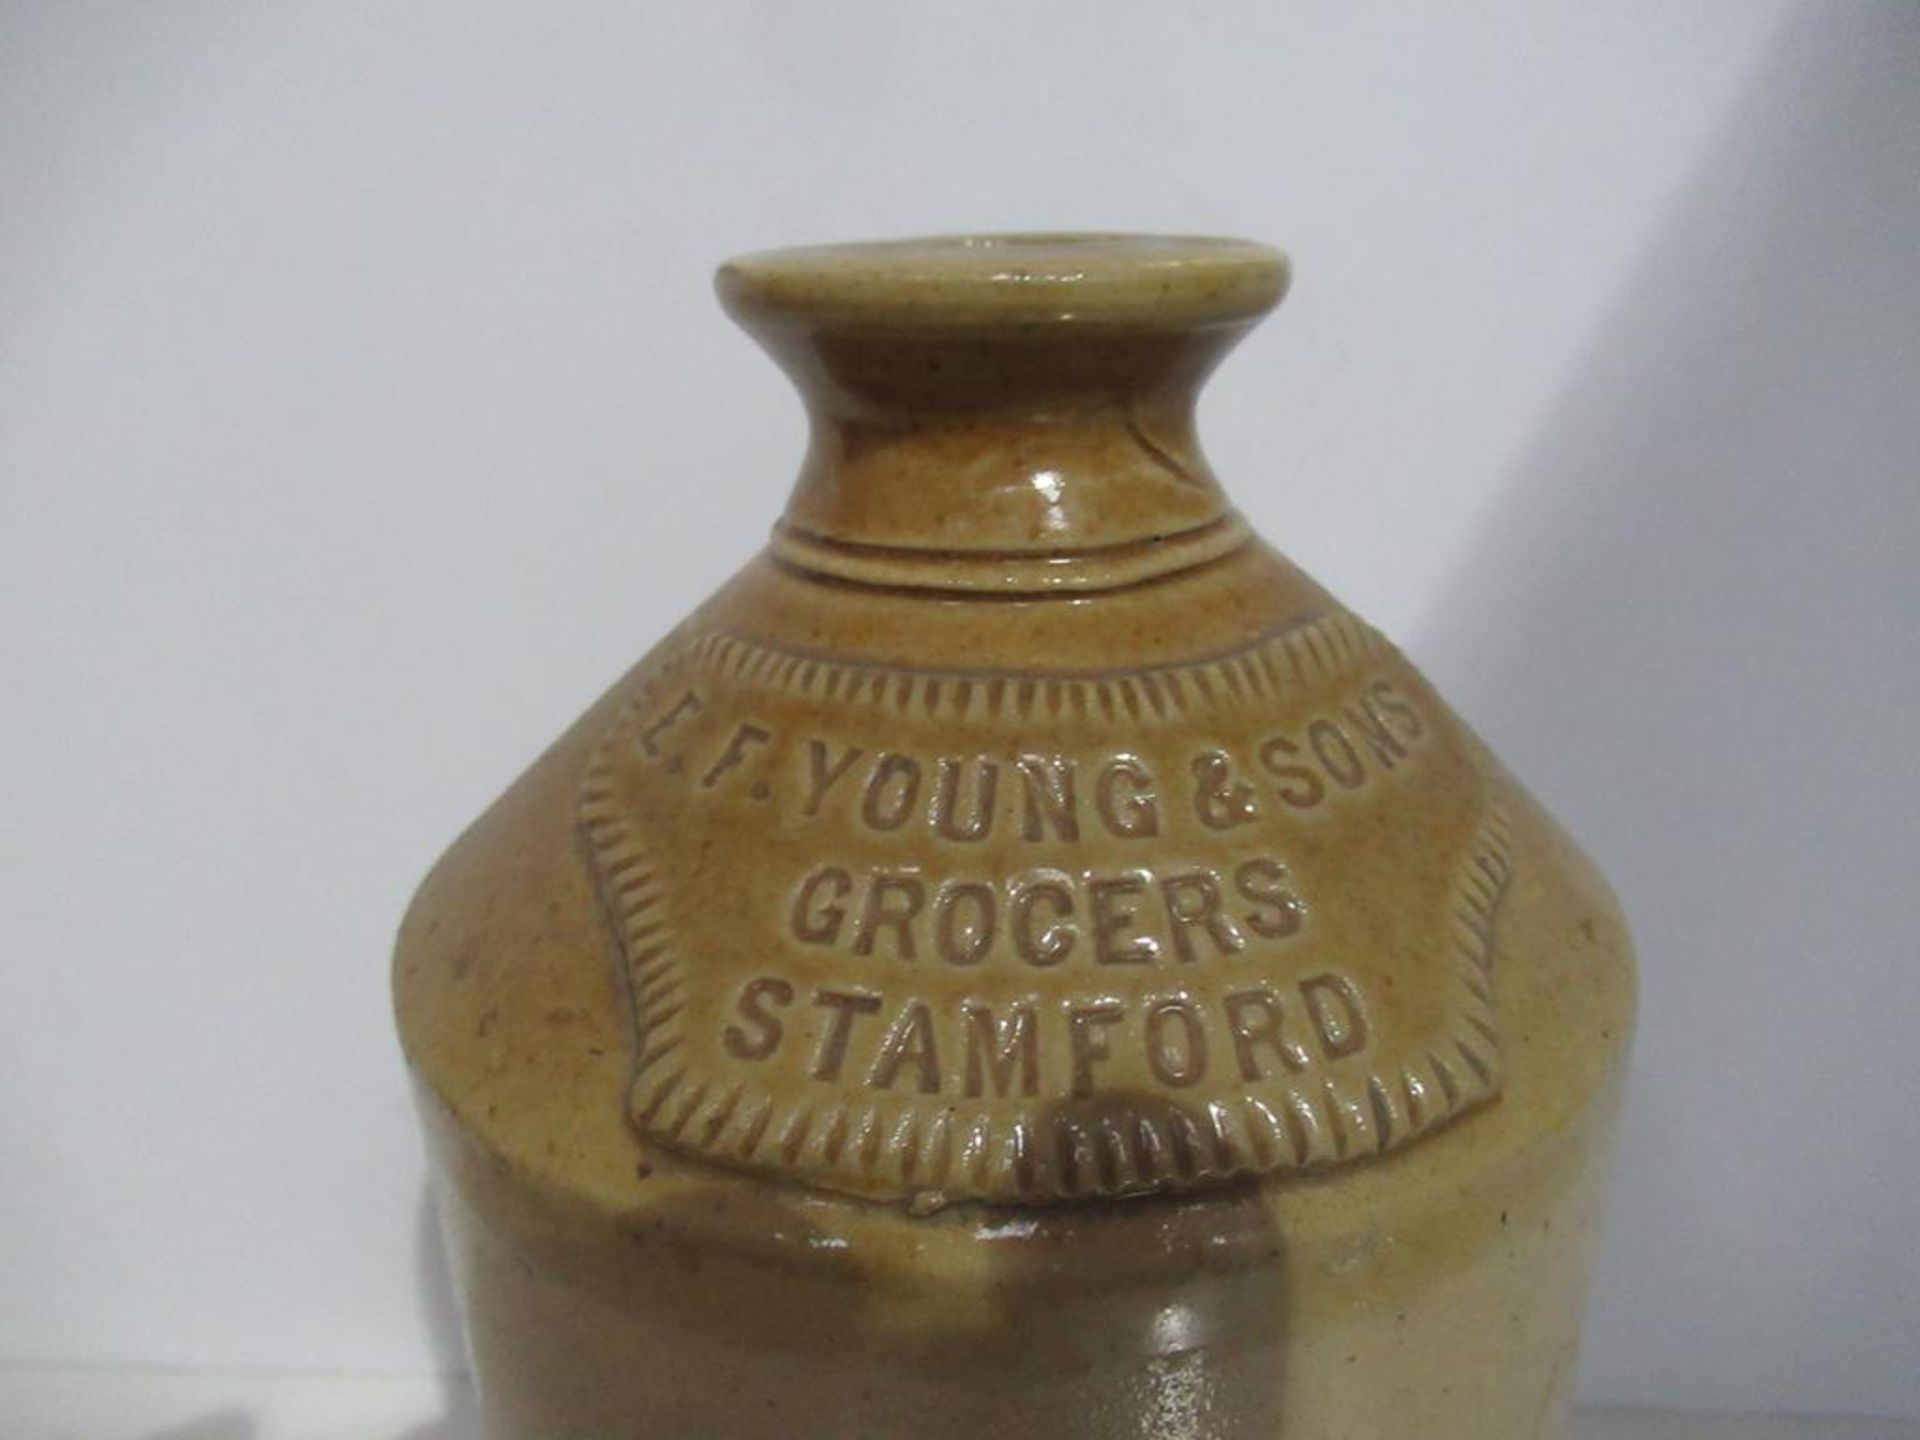 E.F.Young & Sons Grocers Stamford Flagon - Image 2 of 9